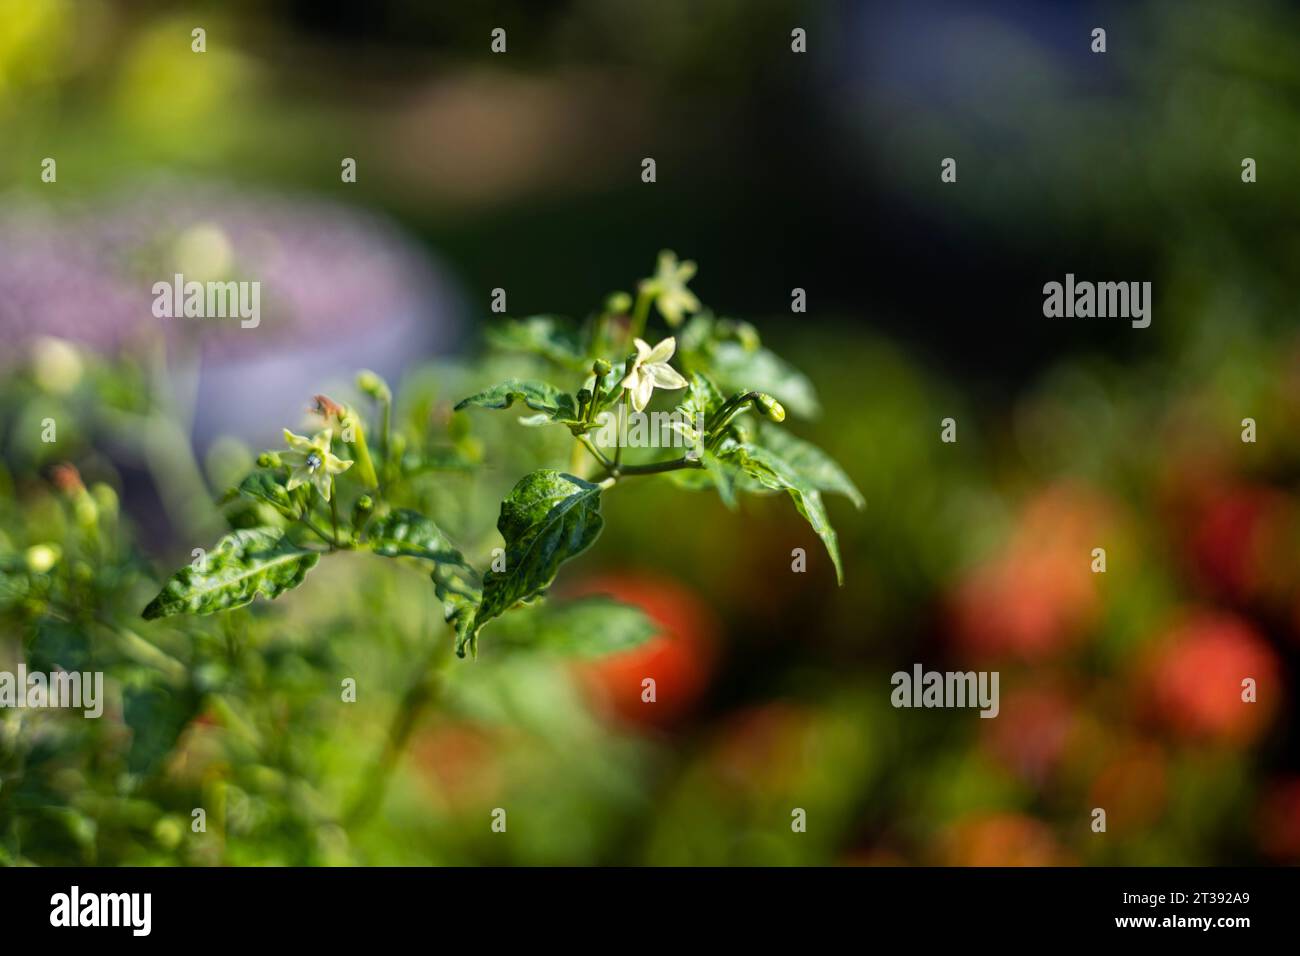 Chilli Leaves And Chilli Flower With Blur Image. Chilli Flowers Are On The Tree. Close Up. Stock Photo